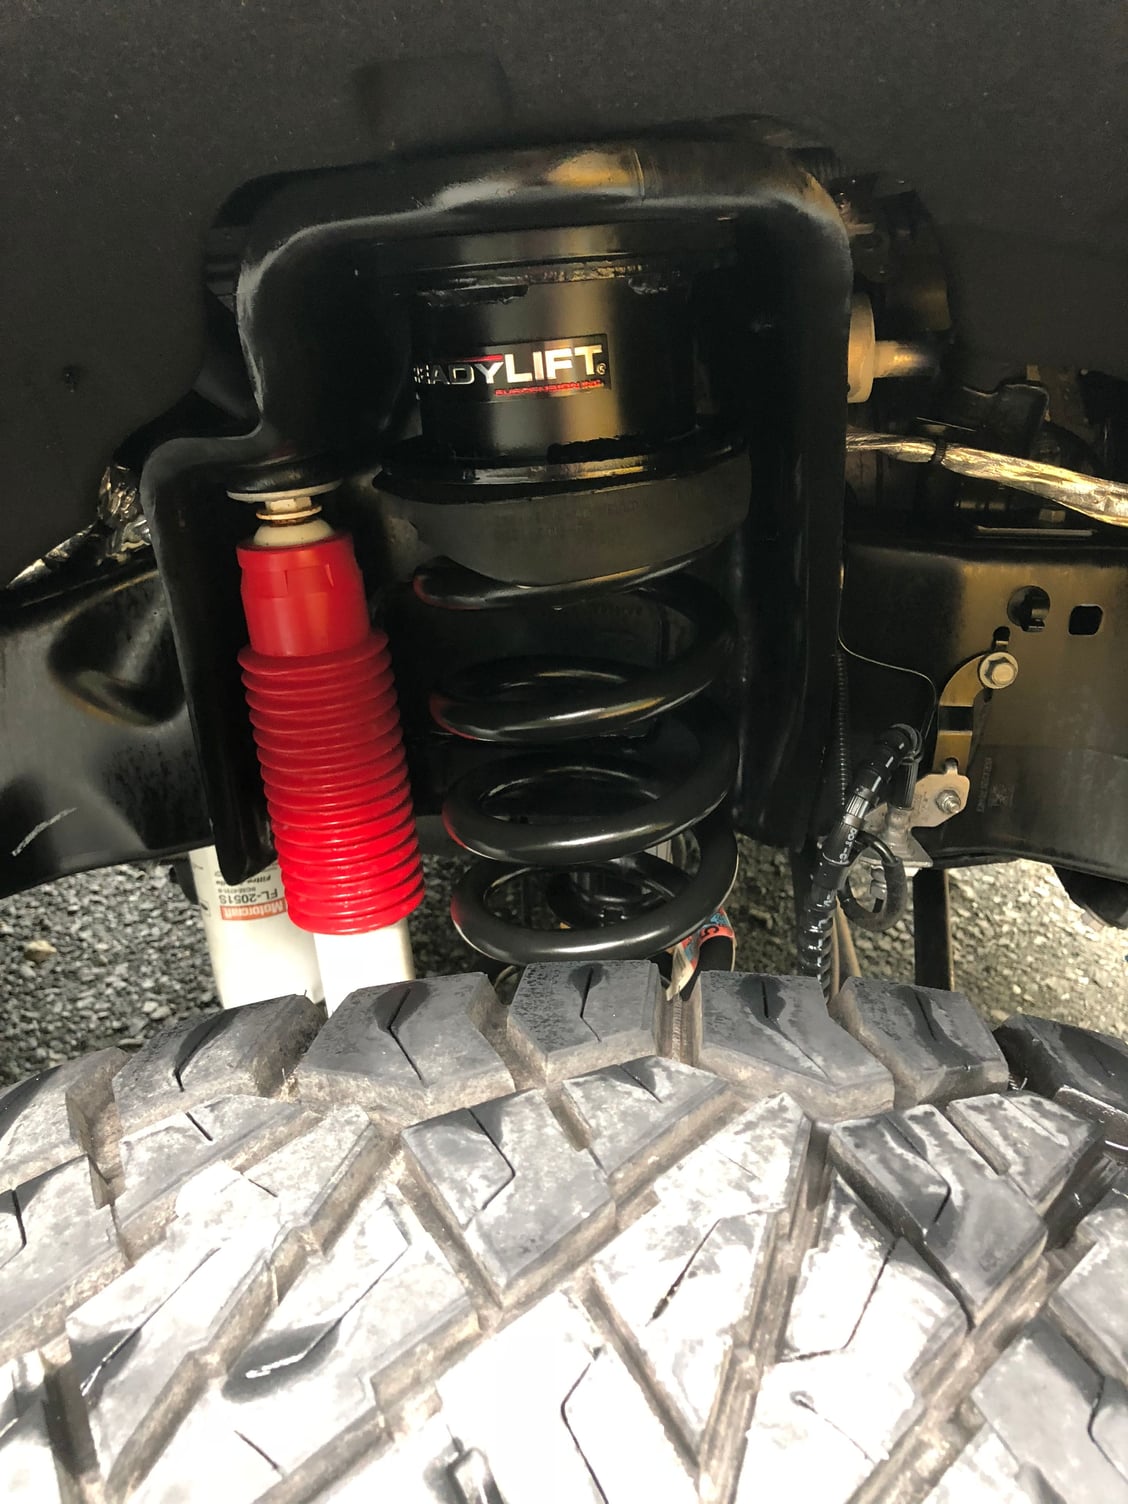 Steering/Suspension - 3.5" Readylift Lift - Used - 2017 to 2019 Ford F-250 HD - Manassas, VA 20112, United States